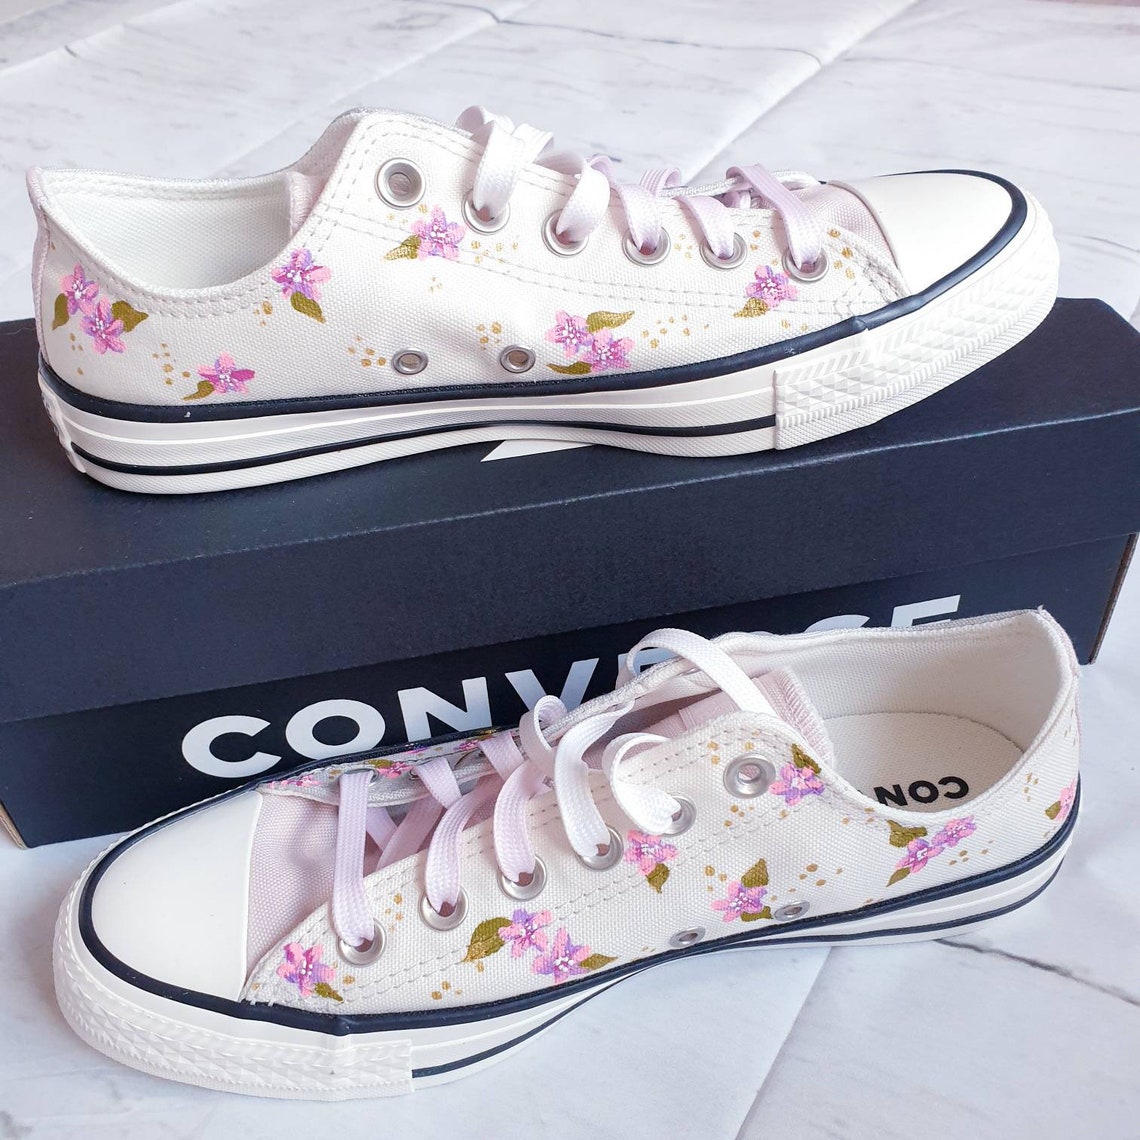 Custom Converse With Blossom Art Flowers on Trainers Painted Converse ...